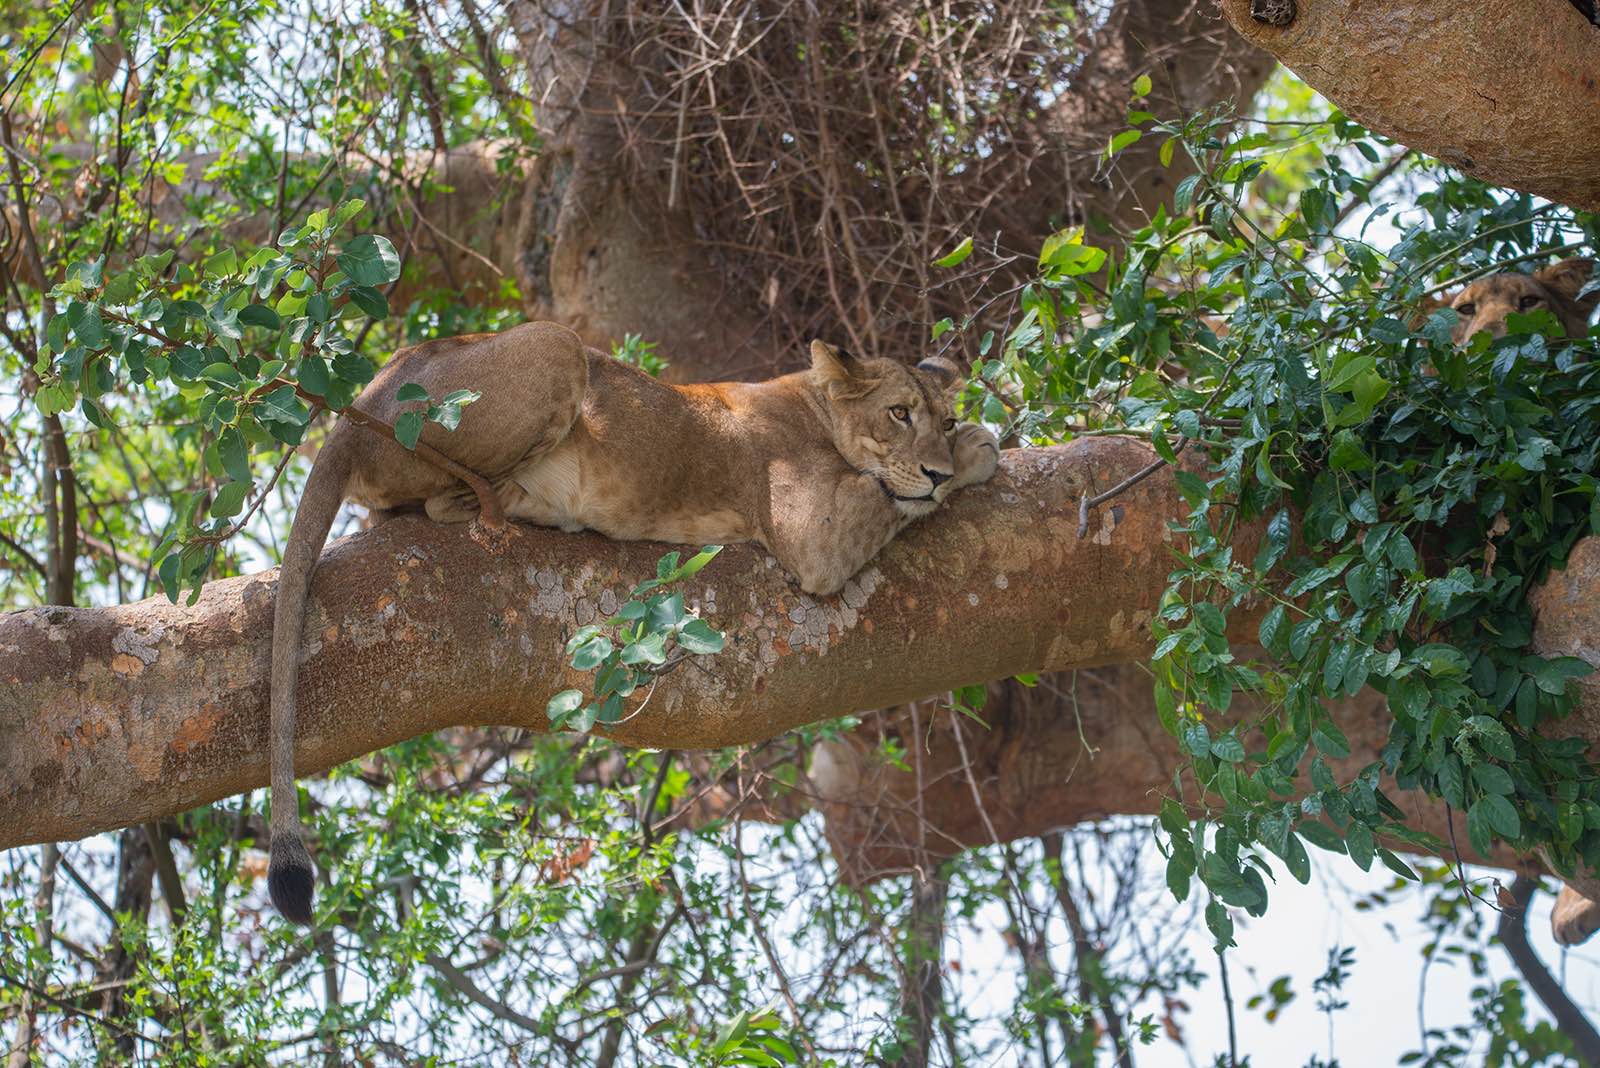 Dozy lions in the fig trees